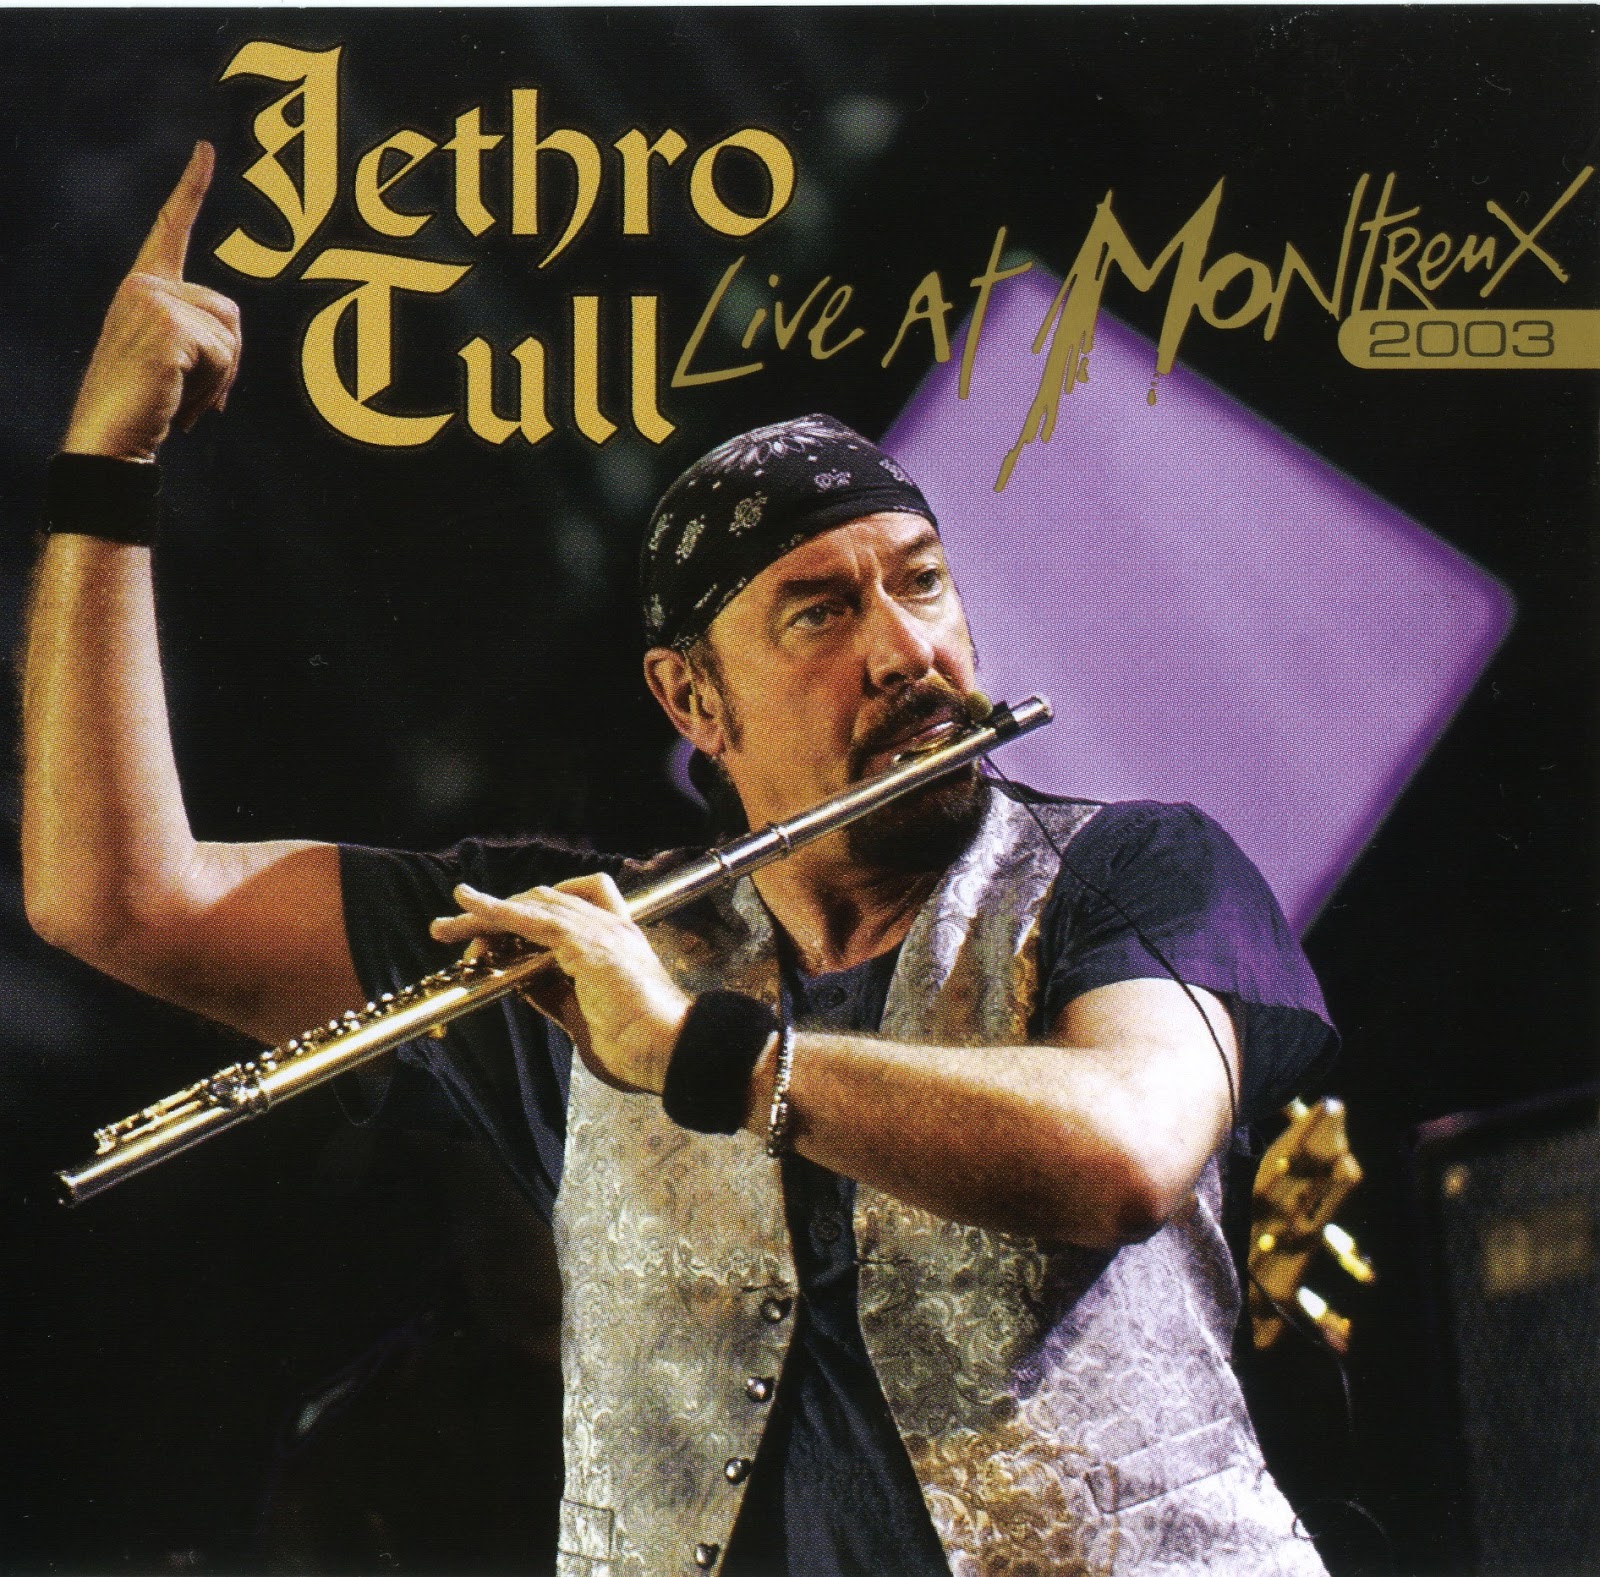 2007 - 2003 - Jethro Tull - Live at Montreux